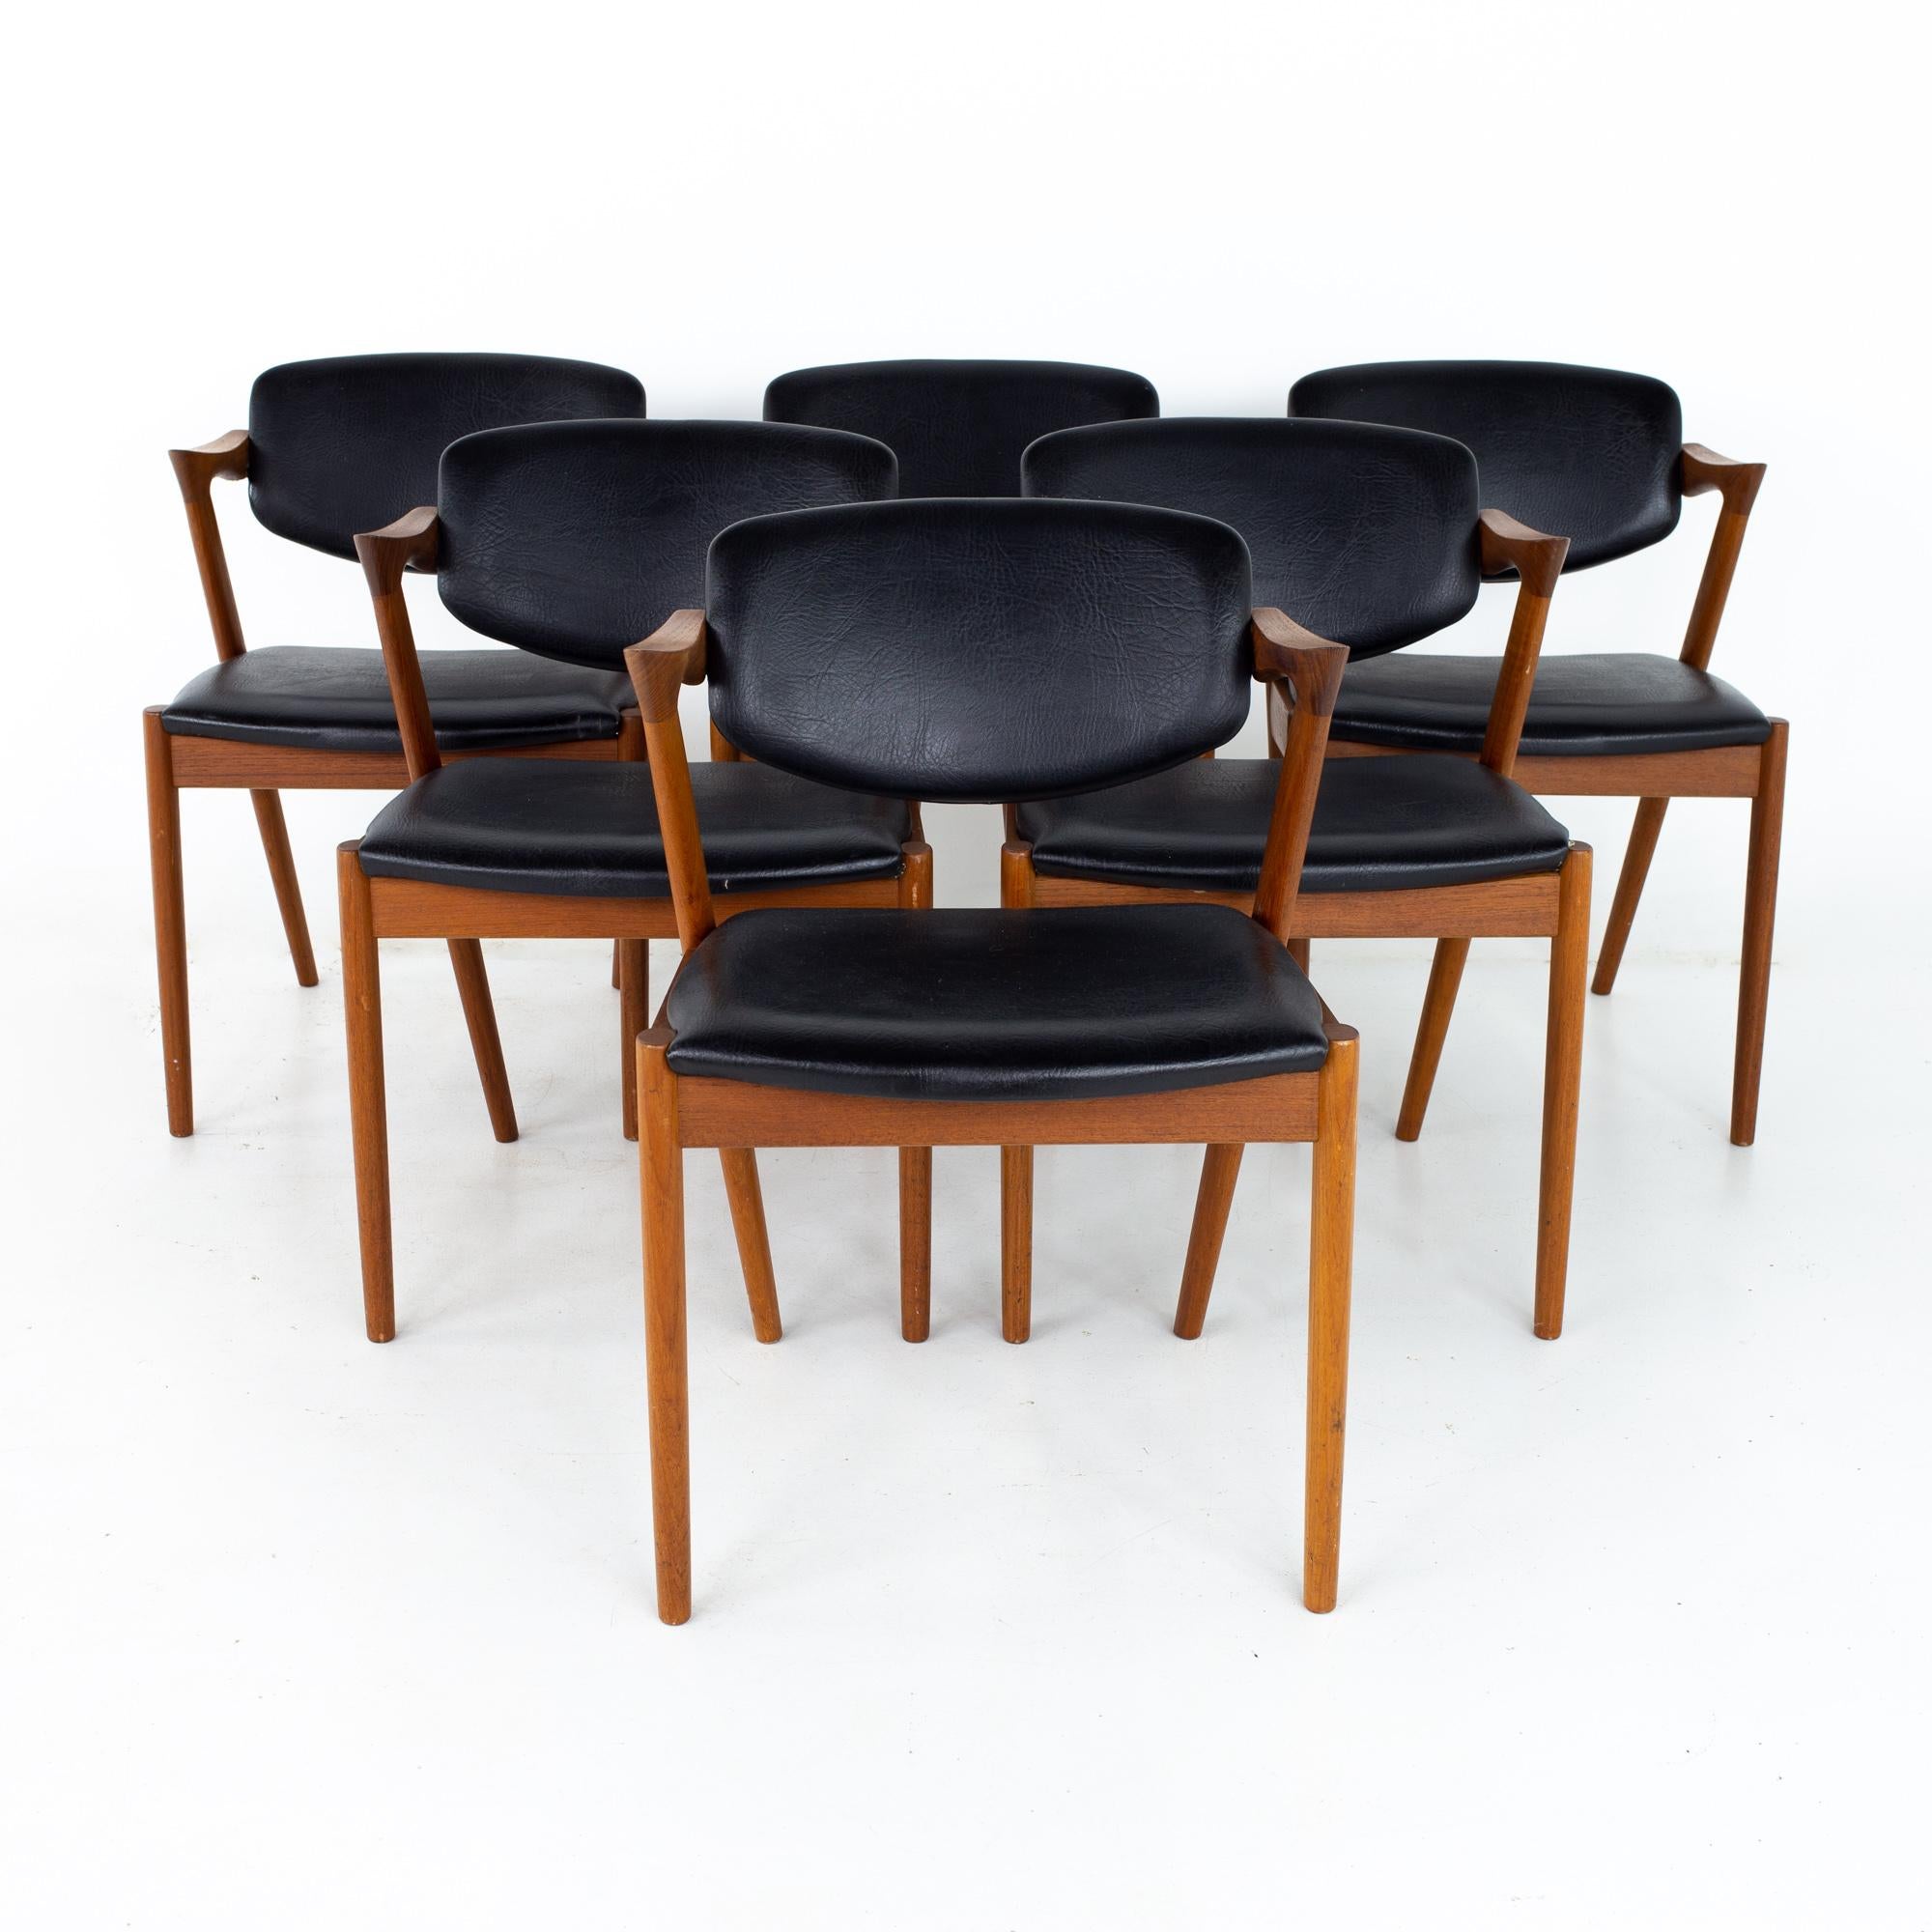 Kai Kristiansen for SVA Mobler model 42 mid century teak Z dining chairs - set of 6.
Each chair measures: 21.5 wide x 21.25 deep x 29 high, with a seat height of 18 and arm height of 26.25 inches

All pieces of furniture can be had in what we